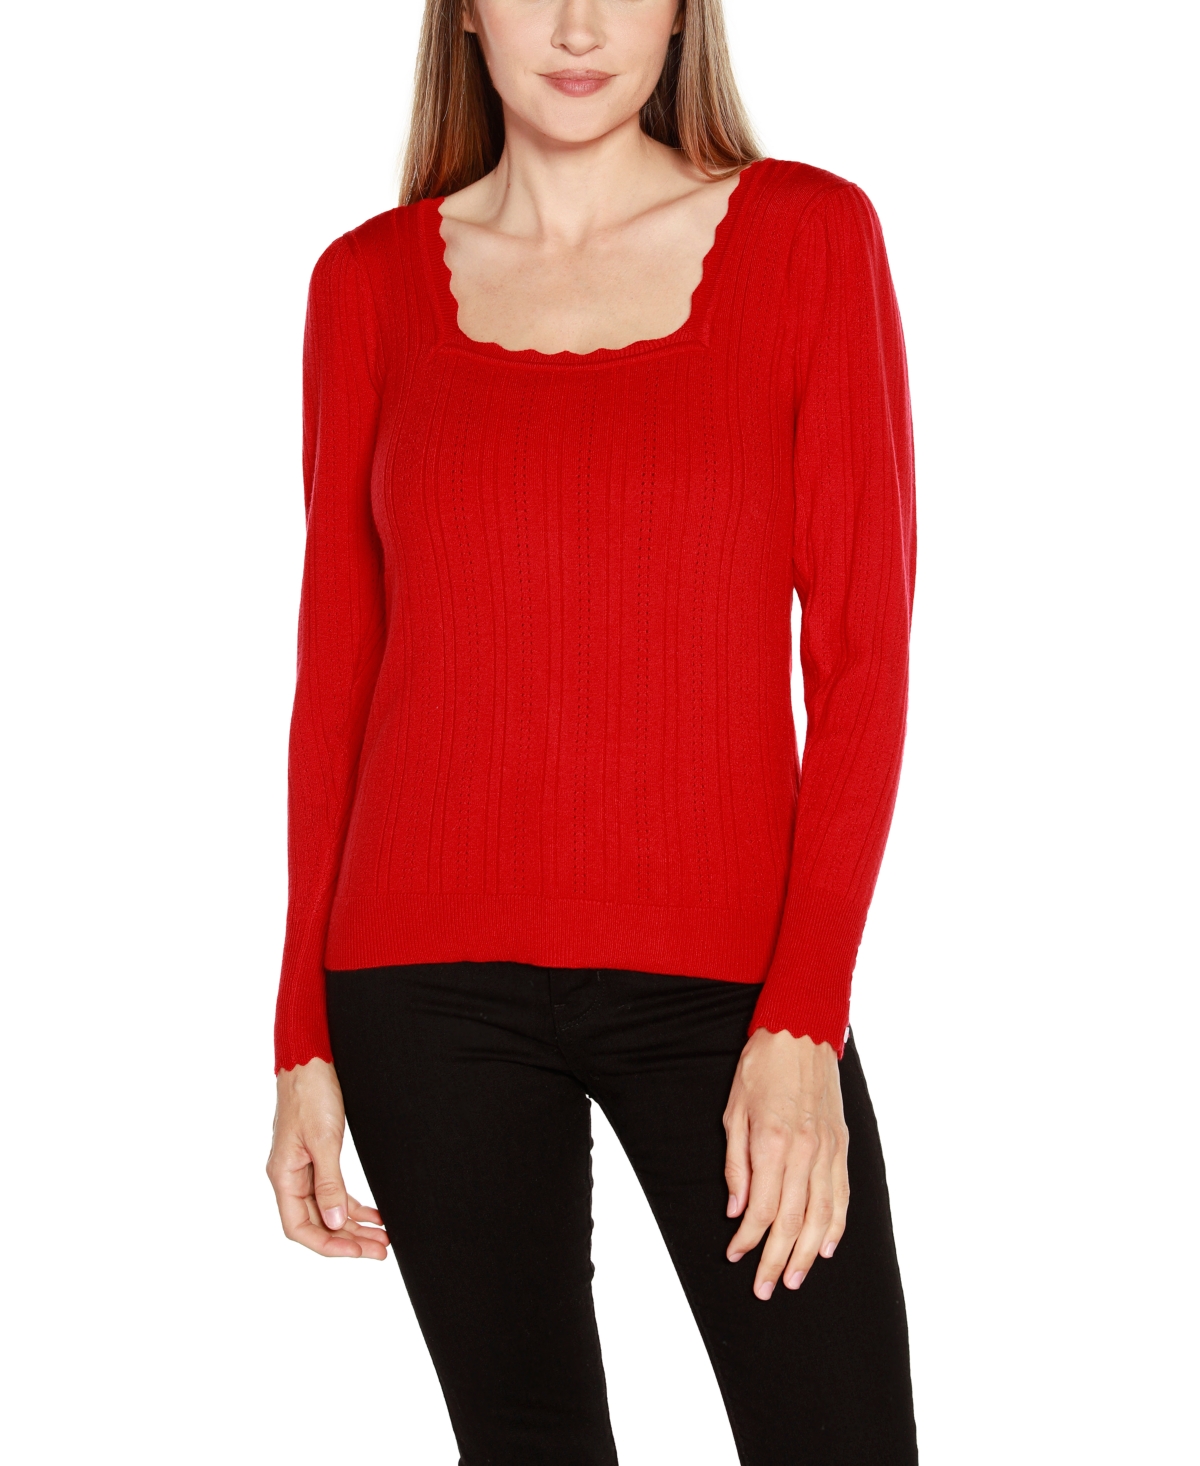 Women's Kaily K. Square Neck Sweater - Red Belldini Red